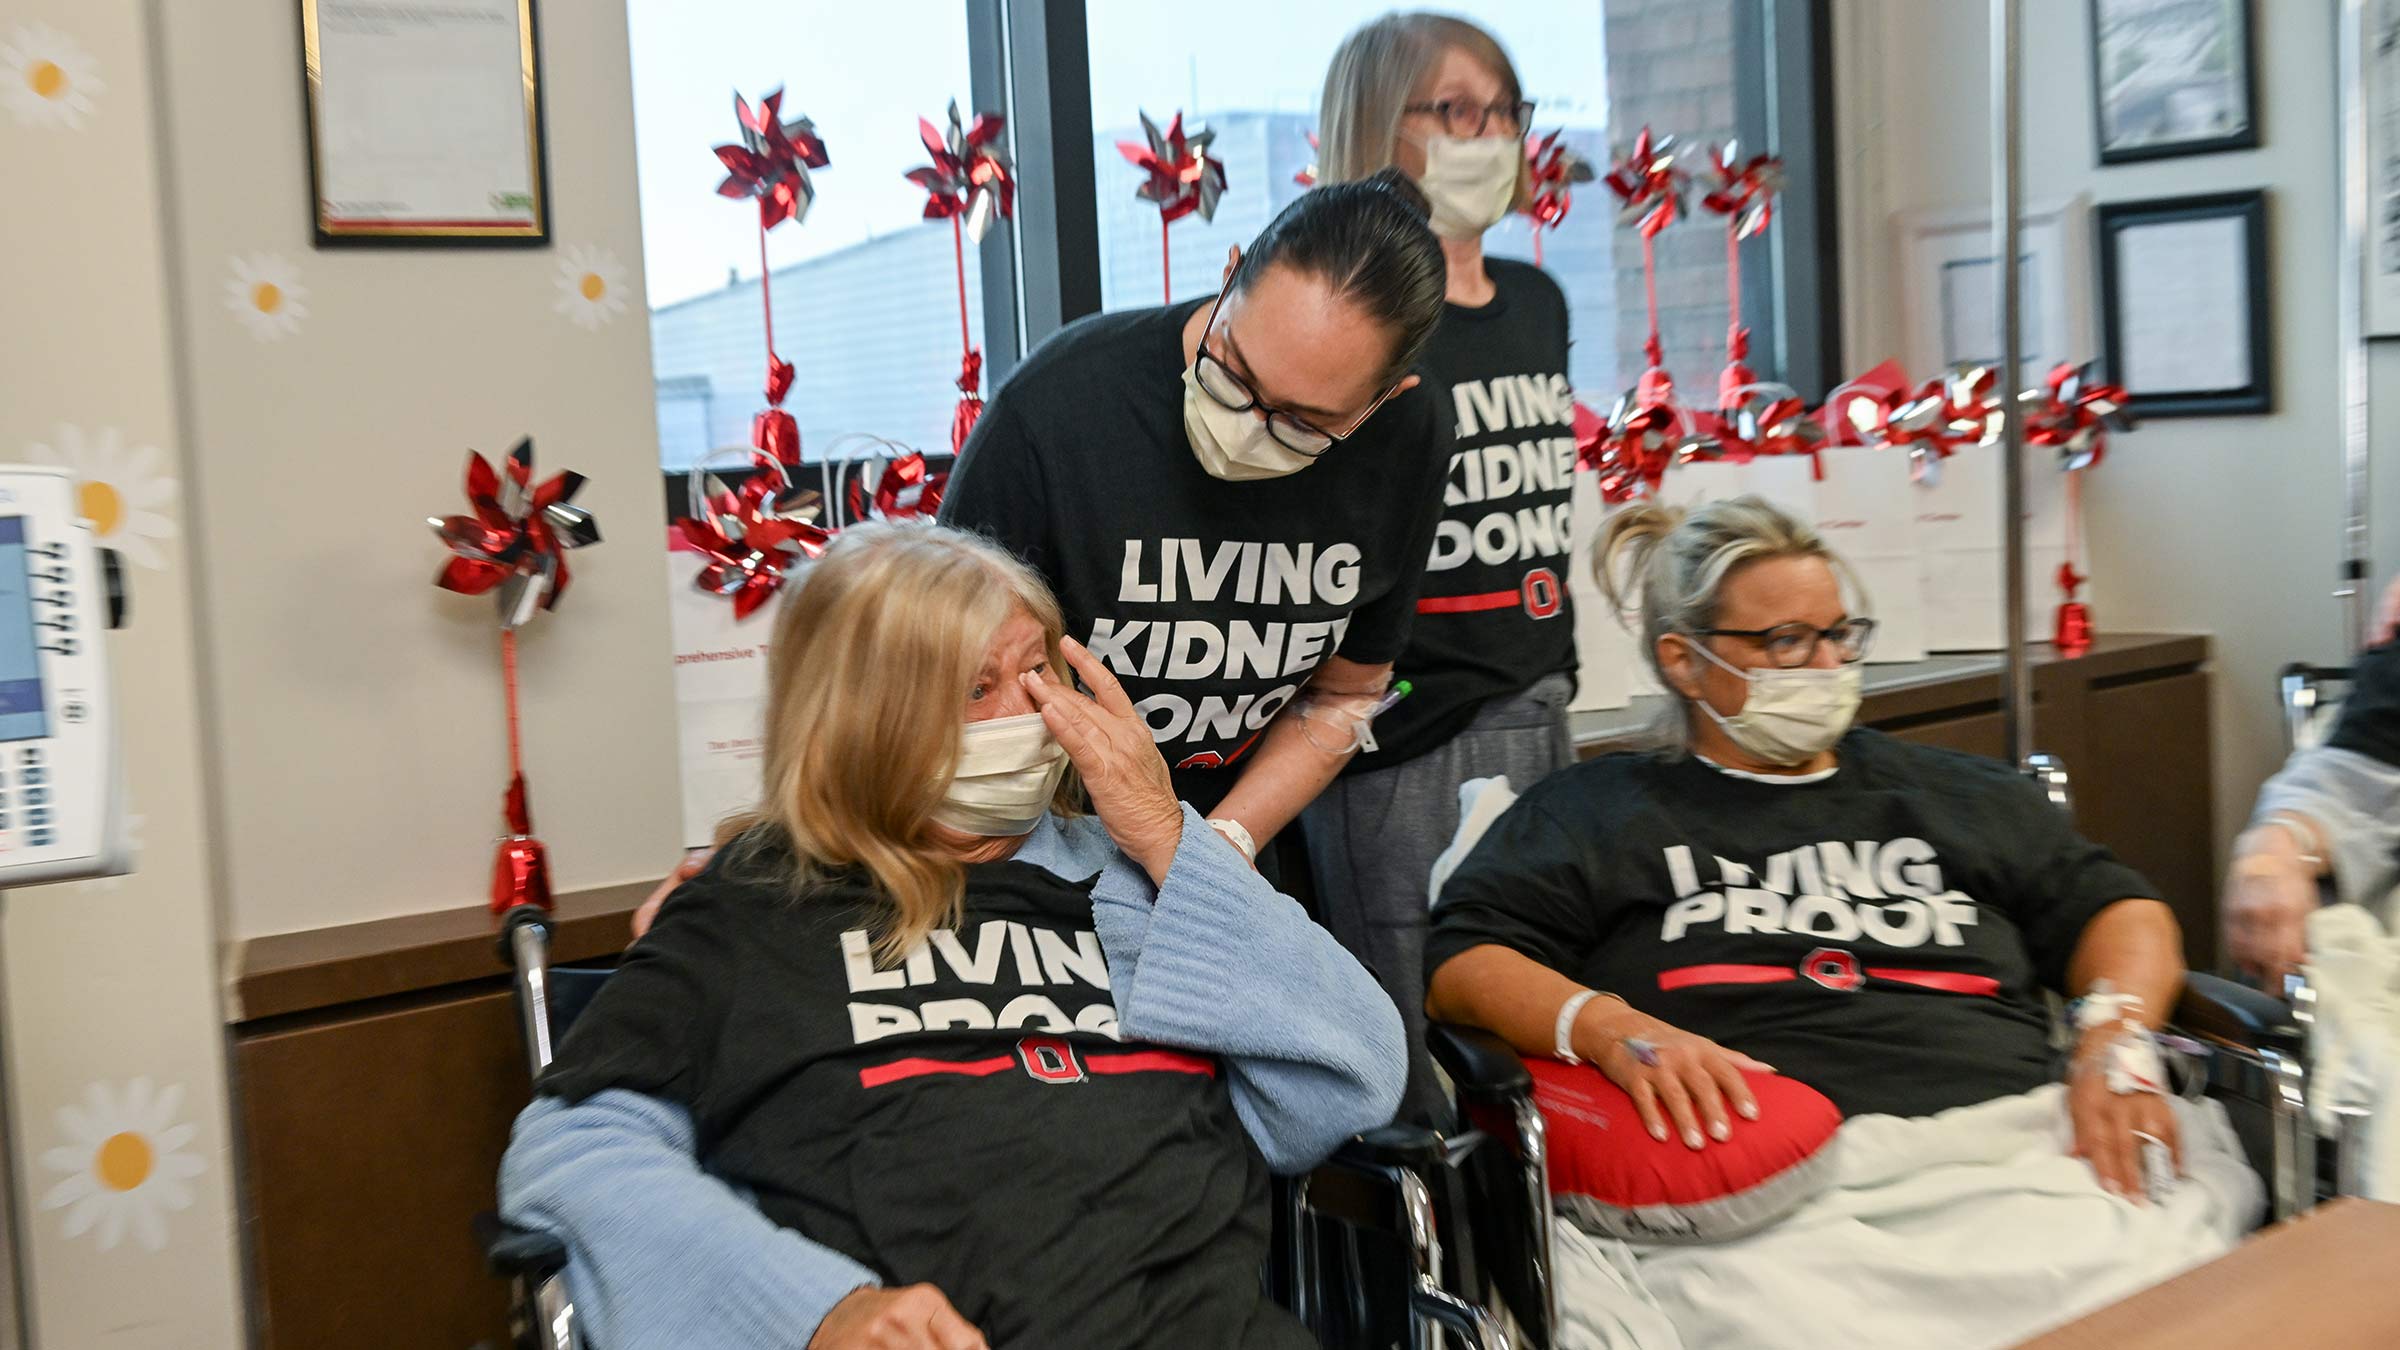 Two women sitting down wearing "Living proof" T-shirts, and two other women standing up behind them wearing "Living kidney donor" T-shirts